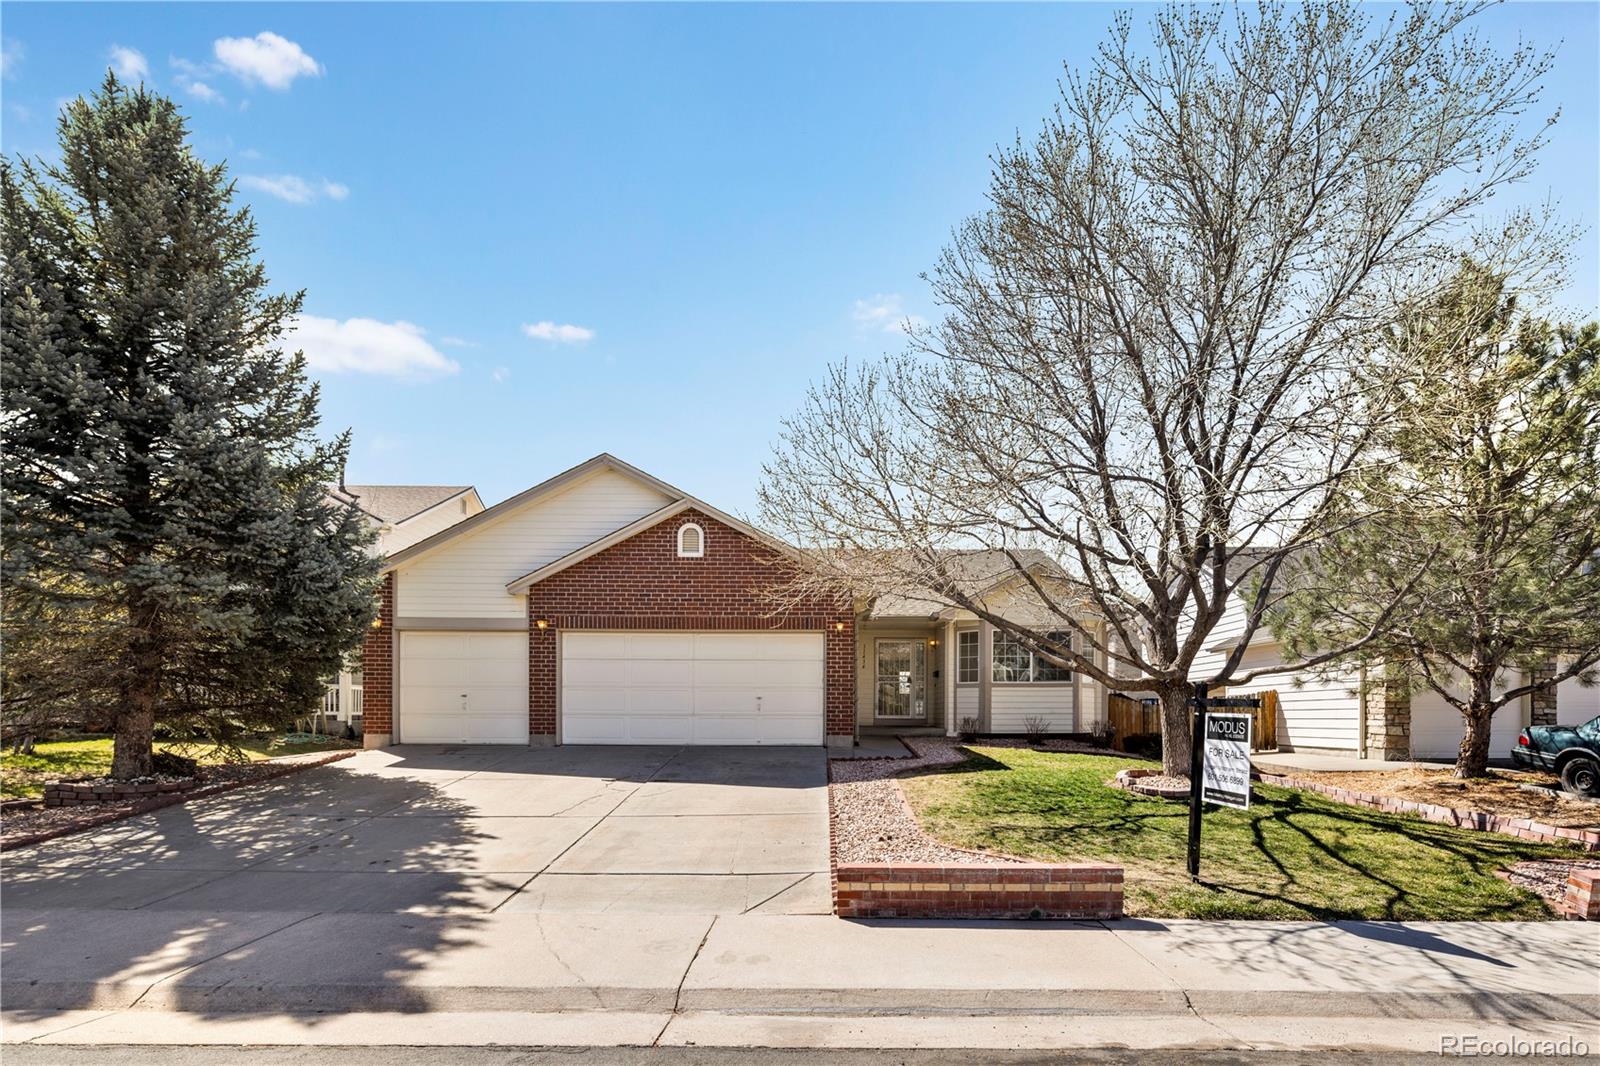 11434  River Run Circle, commerce city MLS: 3010350 Beds: 4 Baths: 3 Price: $533,000